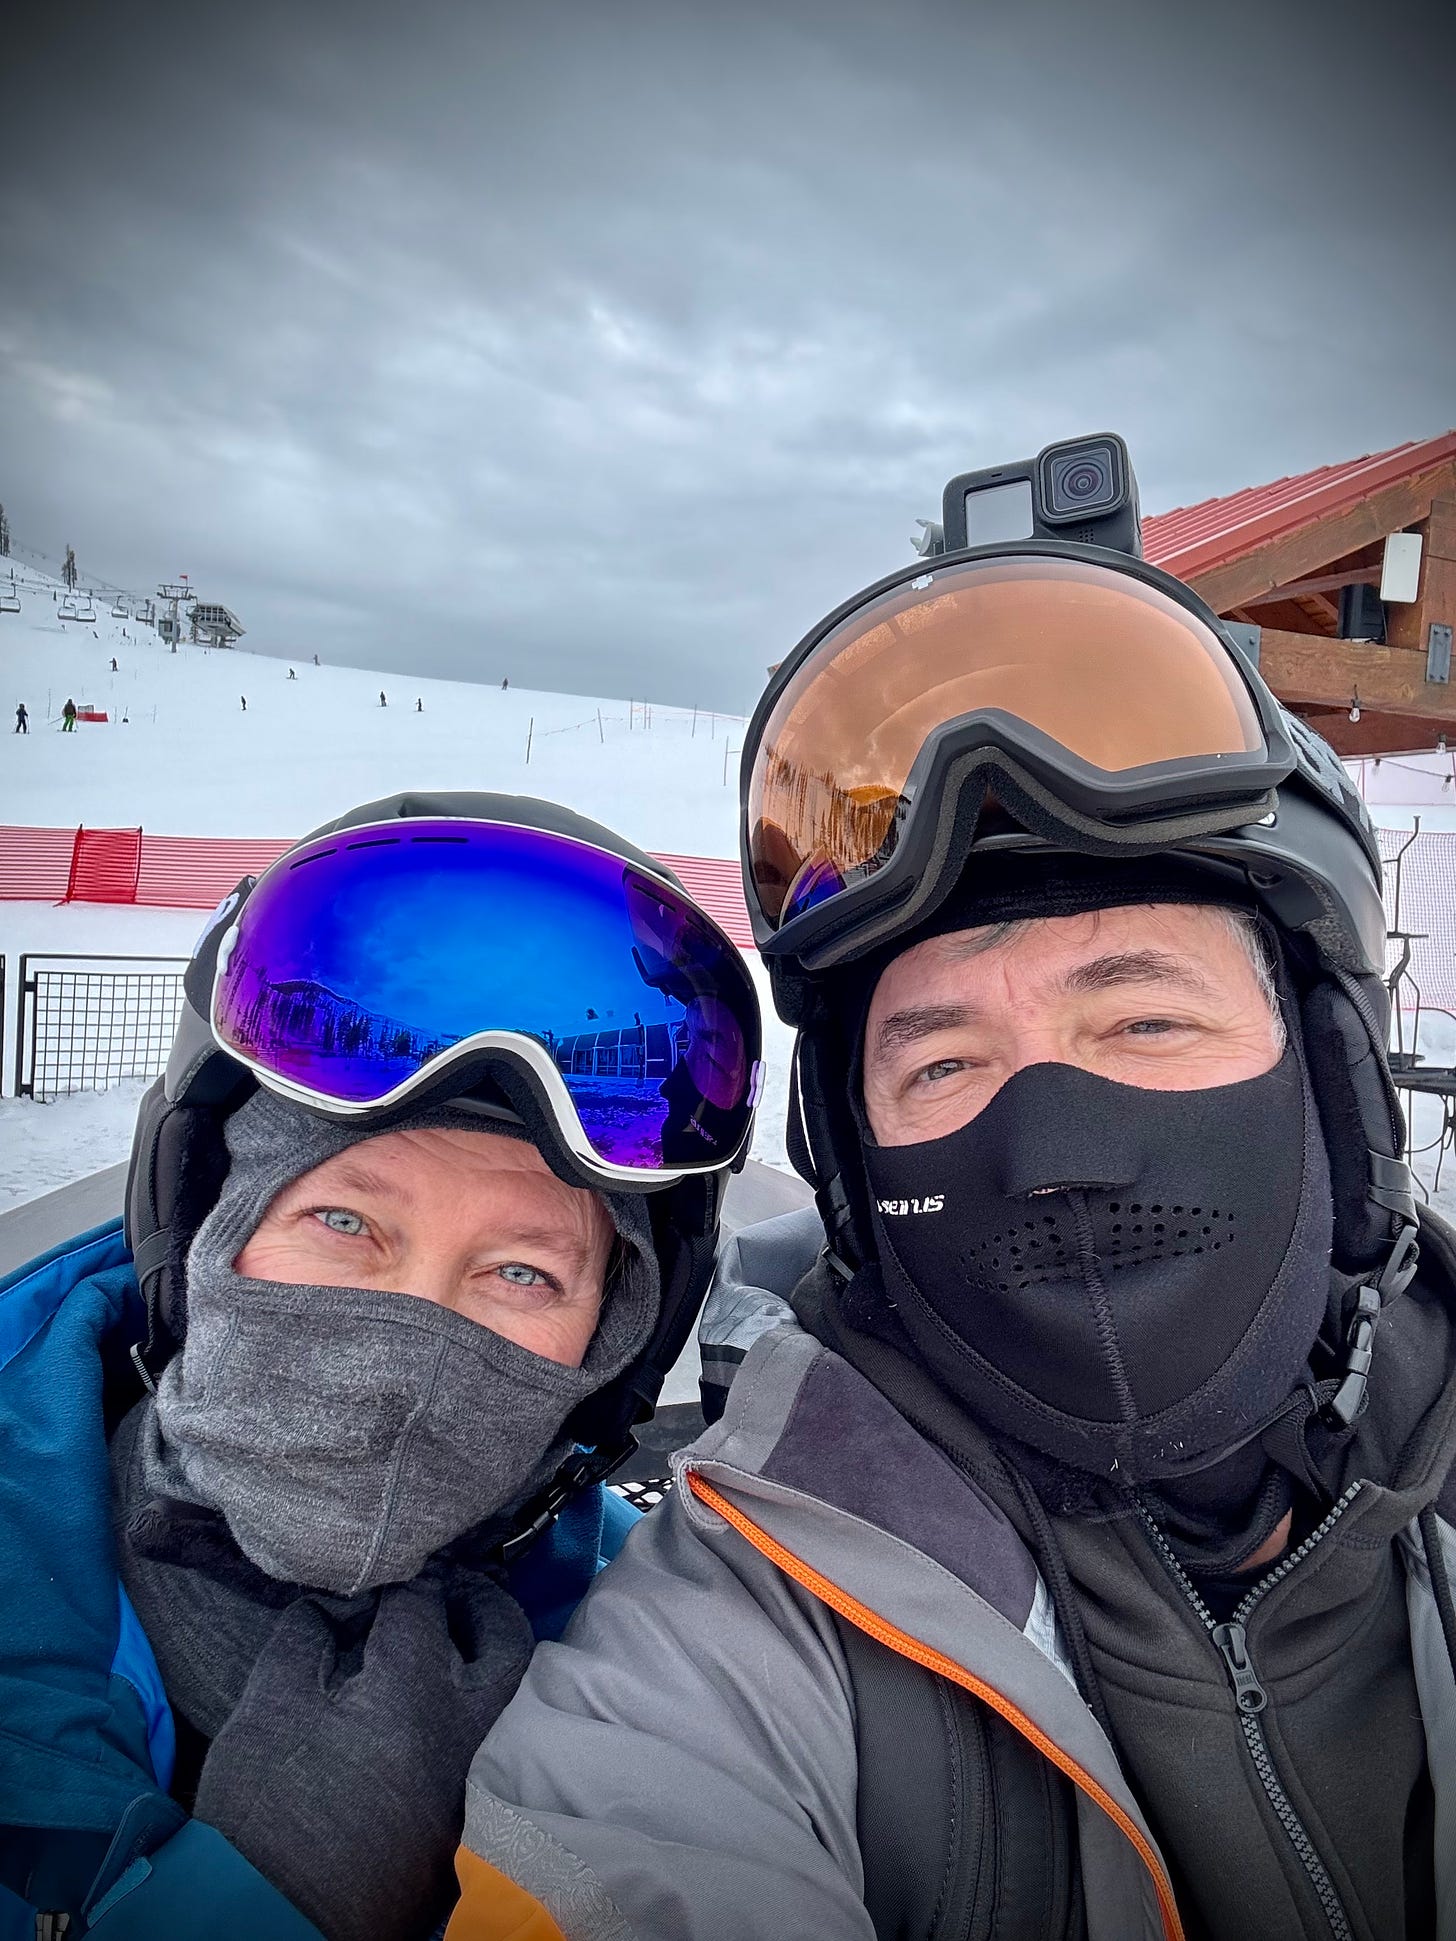 My wife and I skiing